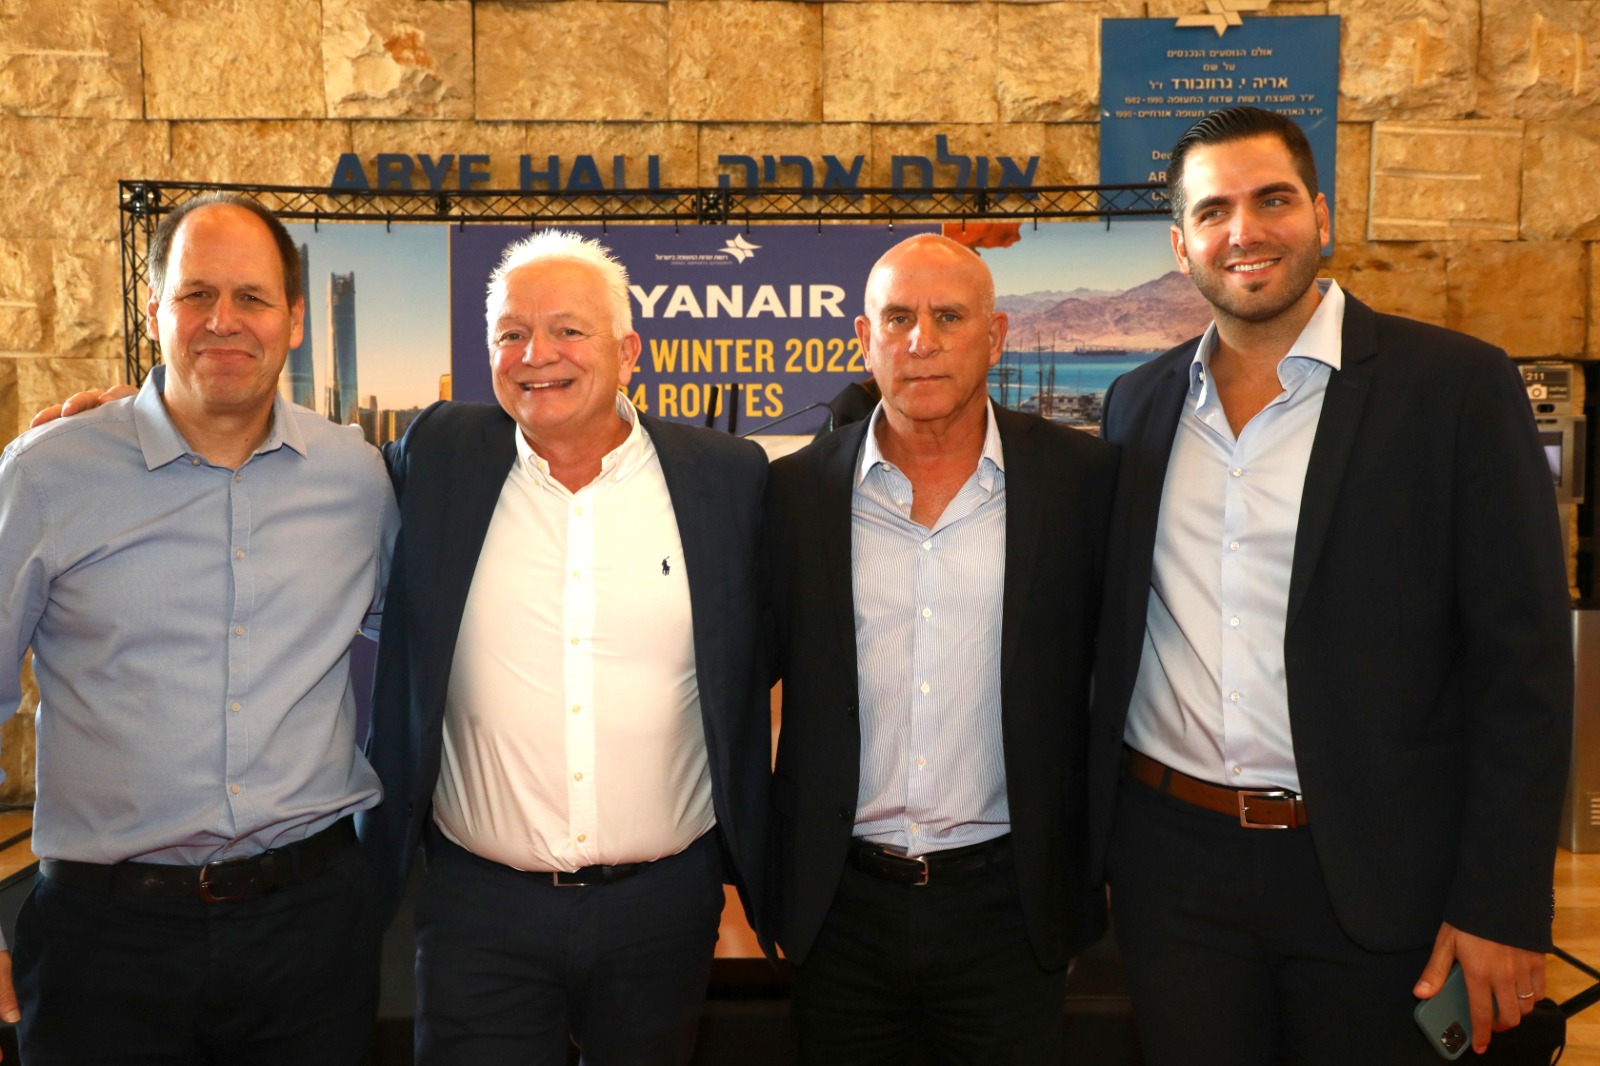 RYANAIR LAUNCHES BIGGEST EVER SCHEDULE TO ISRAEL